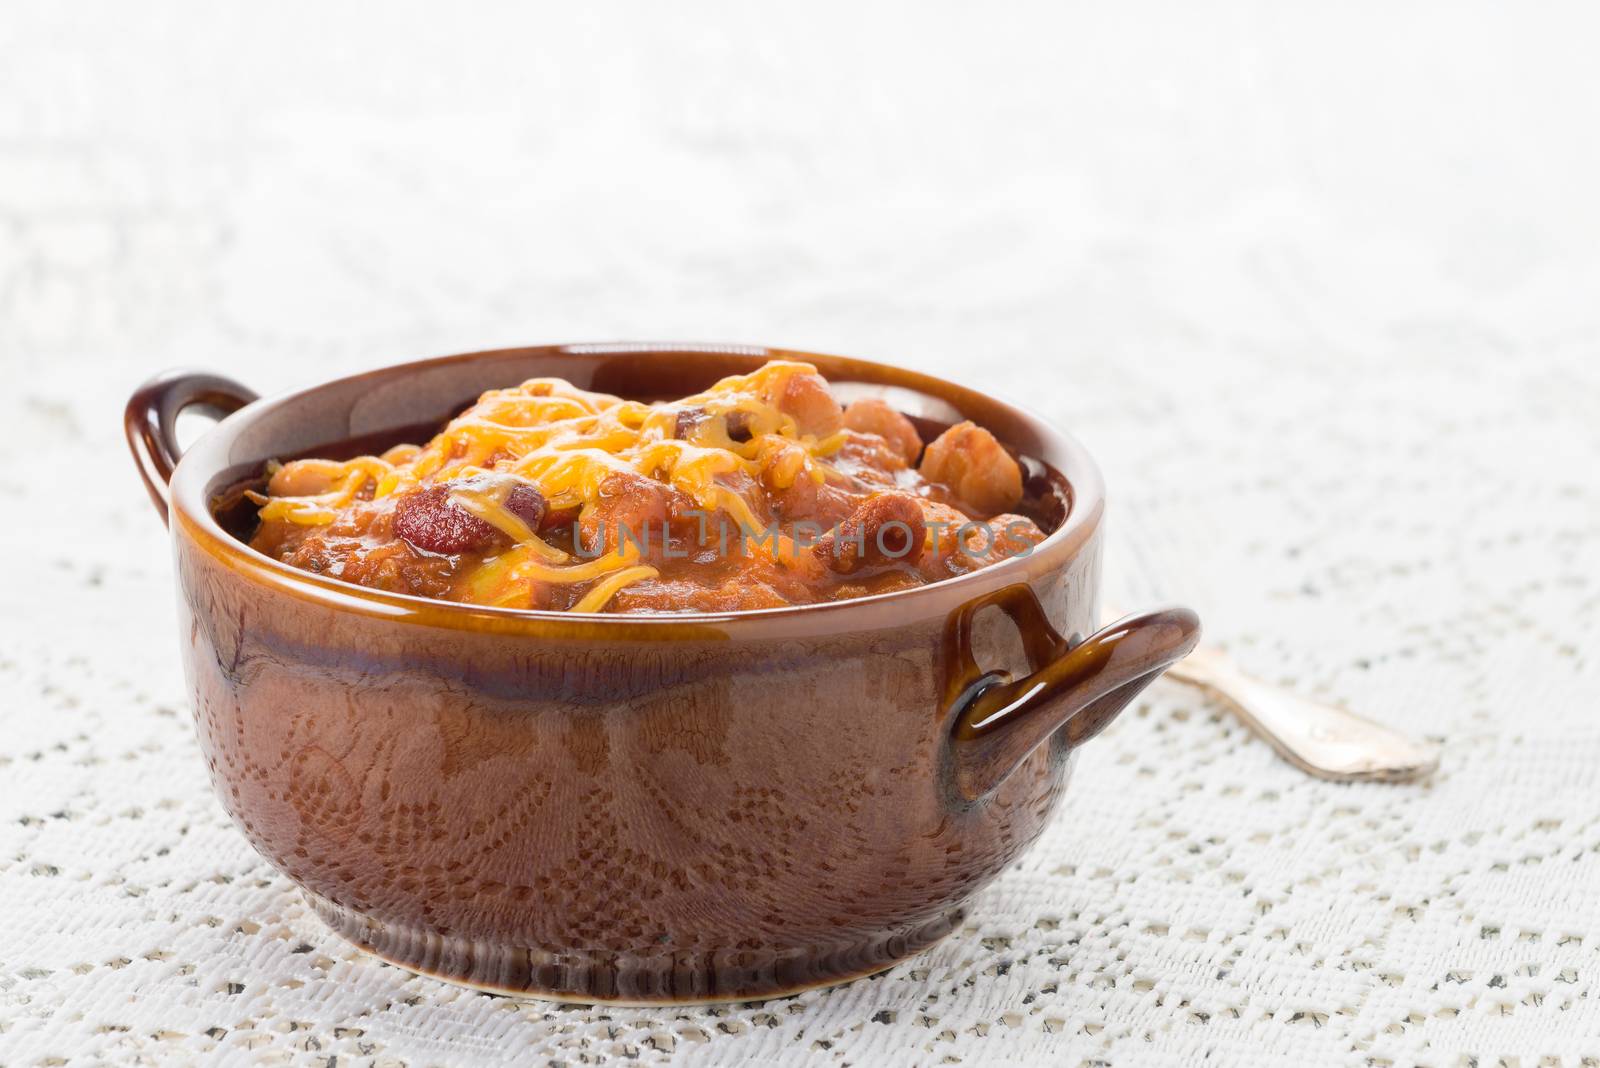 Bowl of hearty vegetarian chili topped with melted cheese.